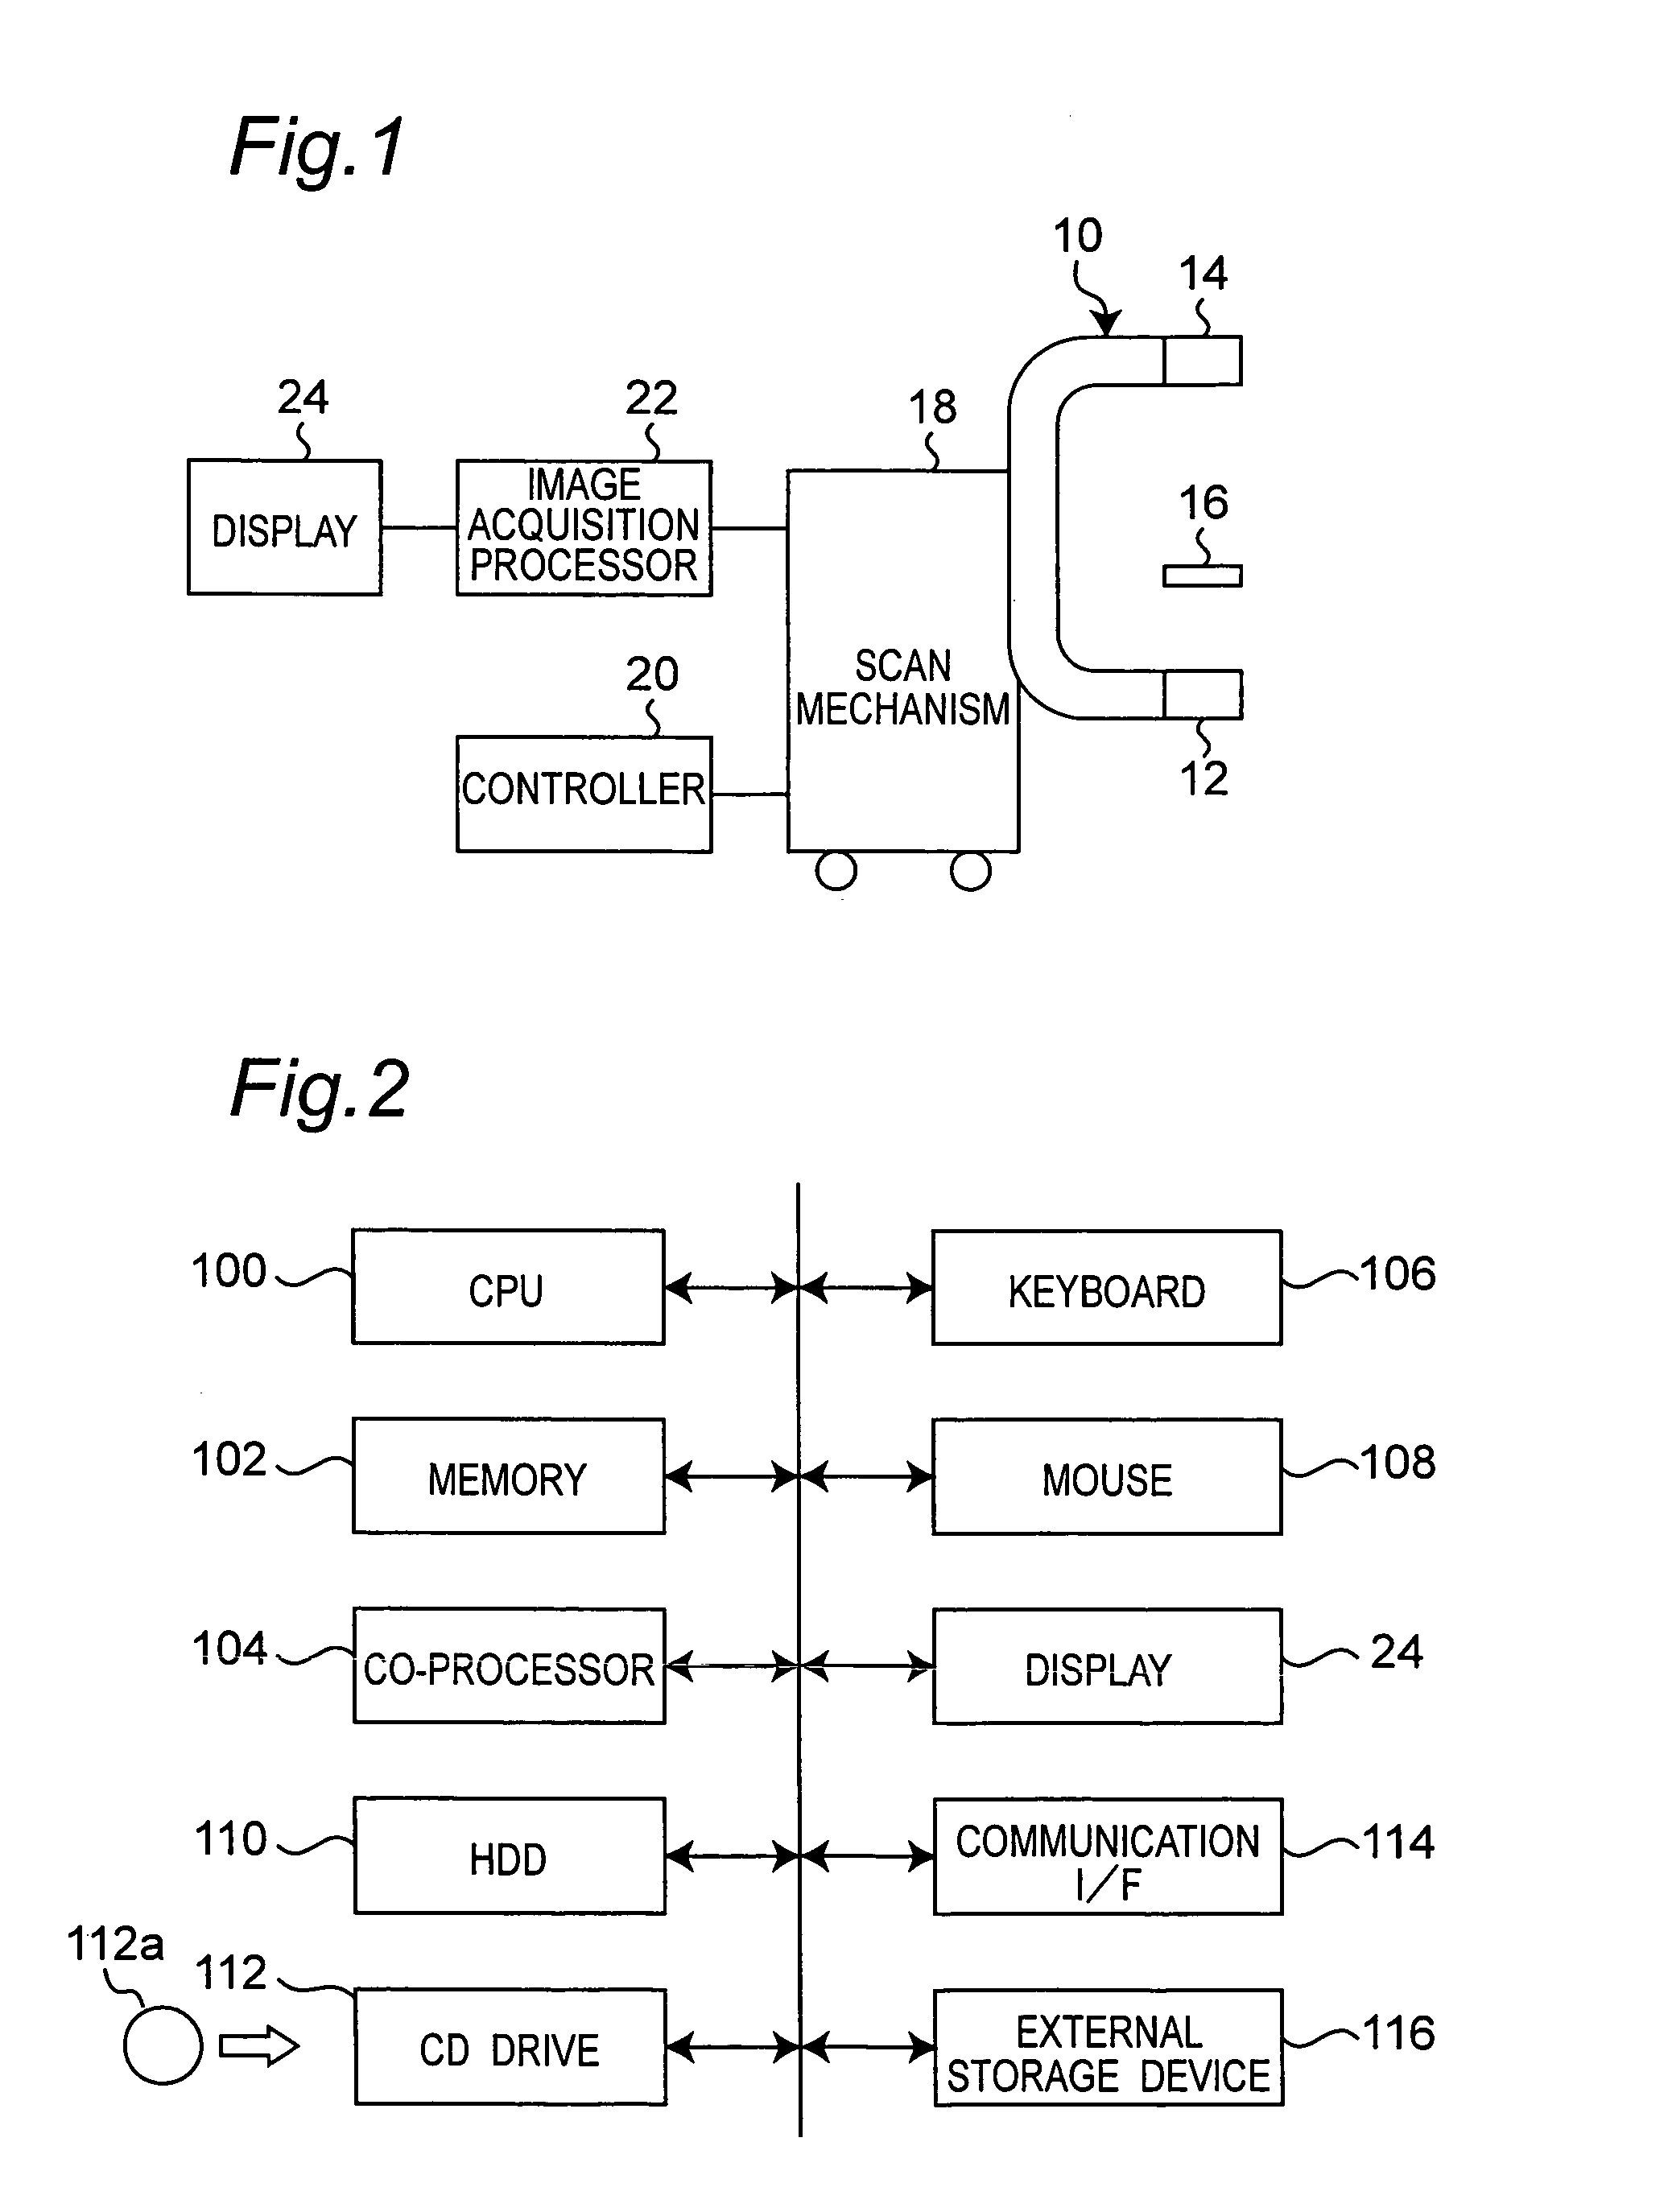 Method and apparatus for X-ray image correction